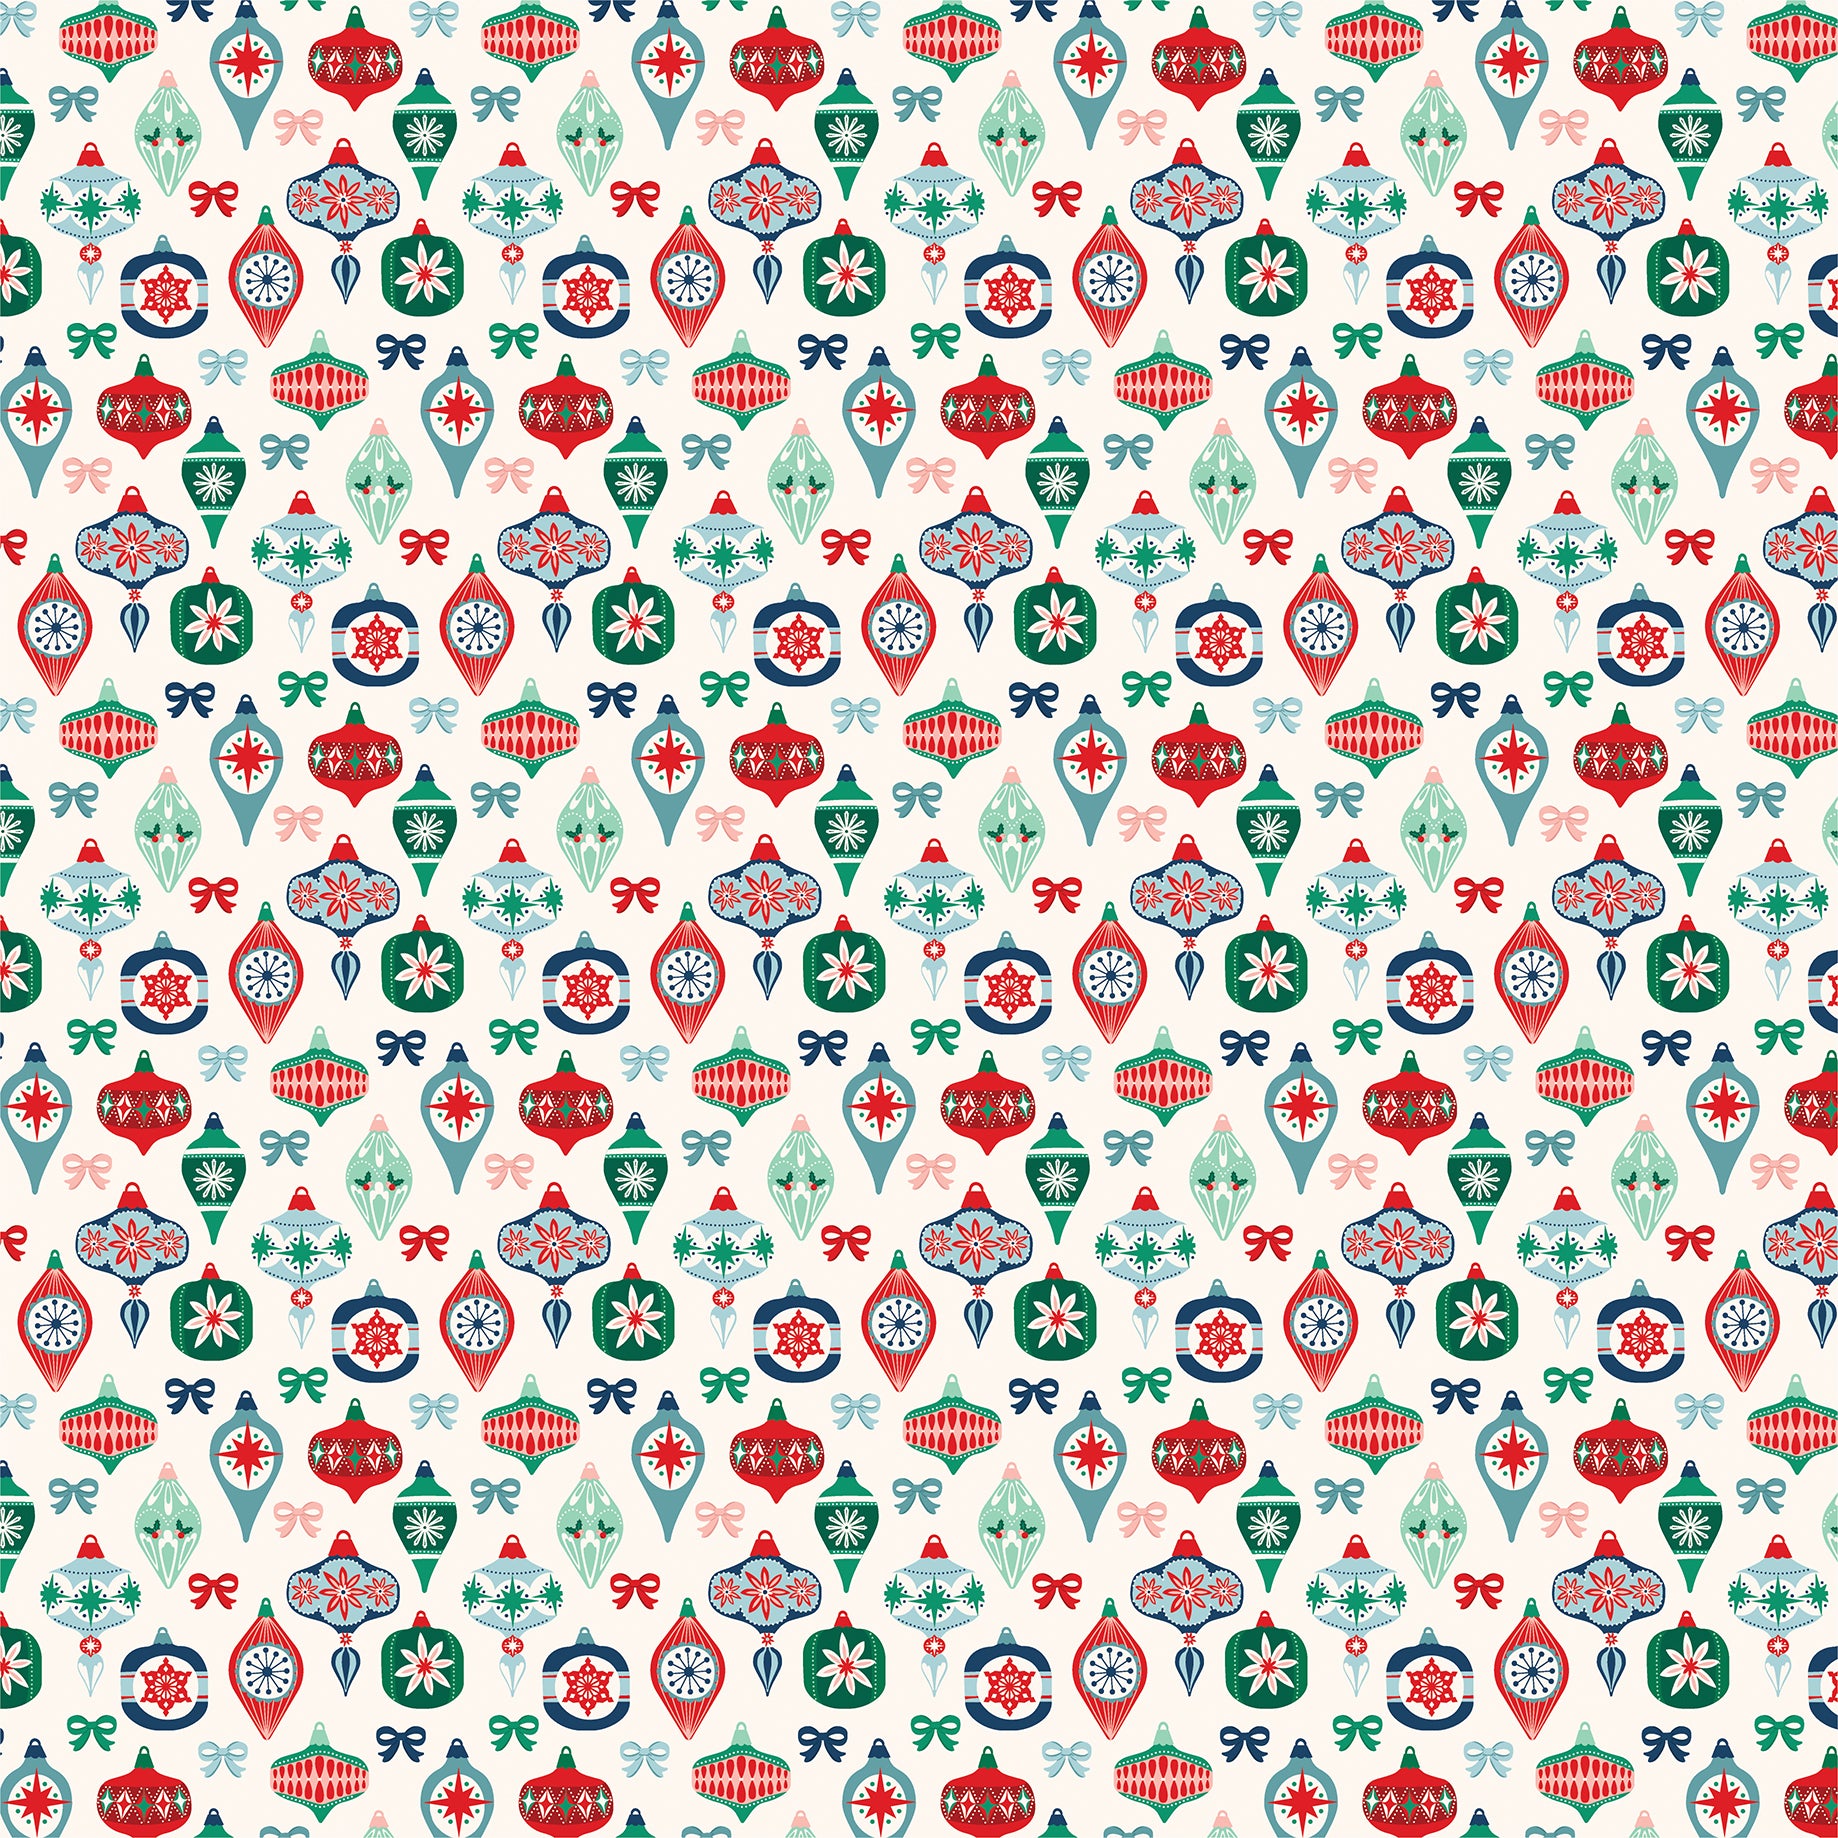 Happy Holidays Collection Ornaments And Bows 12 x 12 Double-Sided Scrapbook Paper by Carta Bella